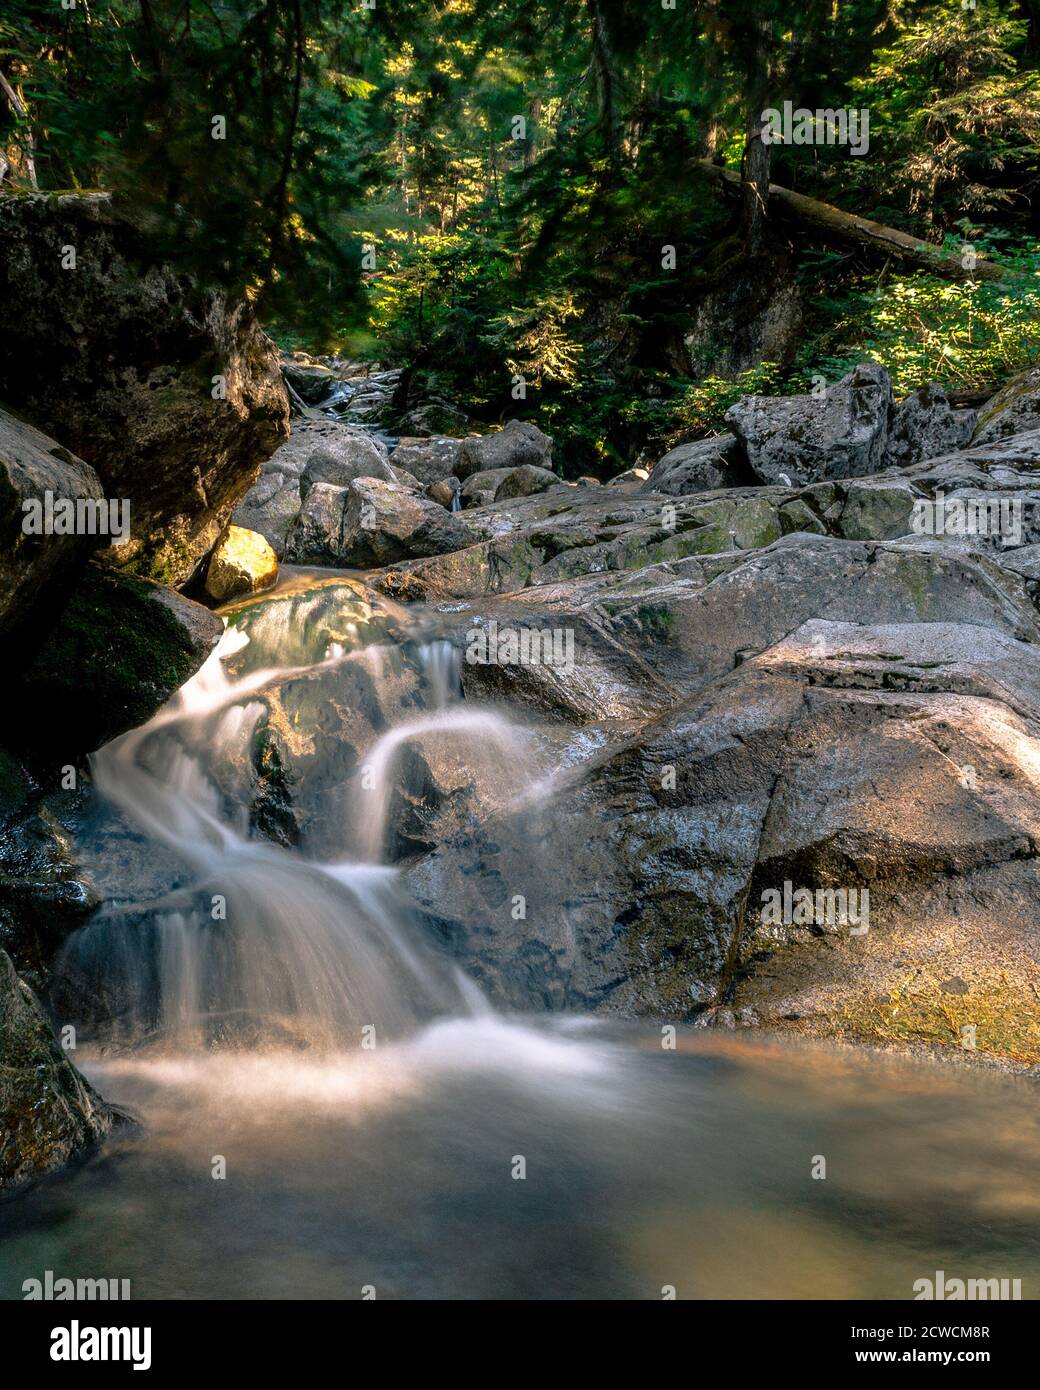 Long exposure waterfall shot in Lynn Valley Forest with Nikon d3200 Stock  Photo - Alamy